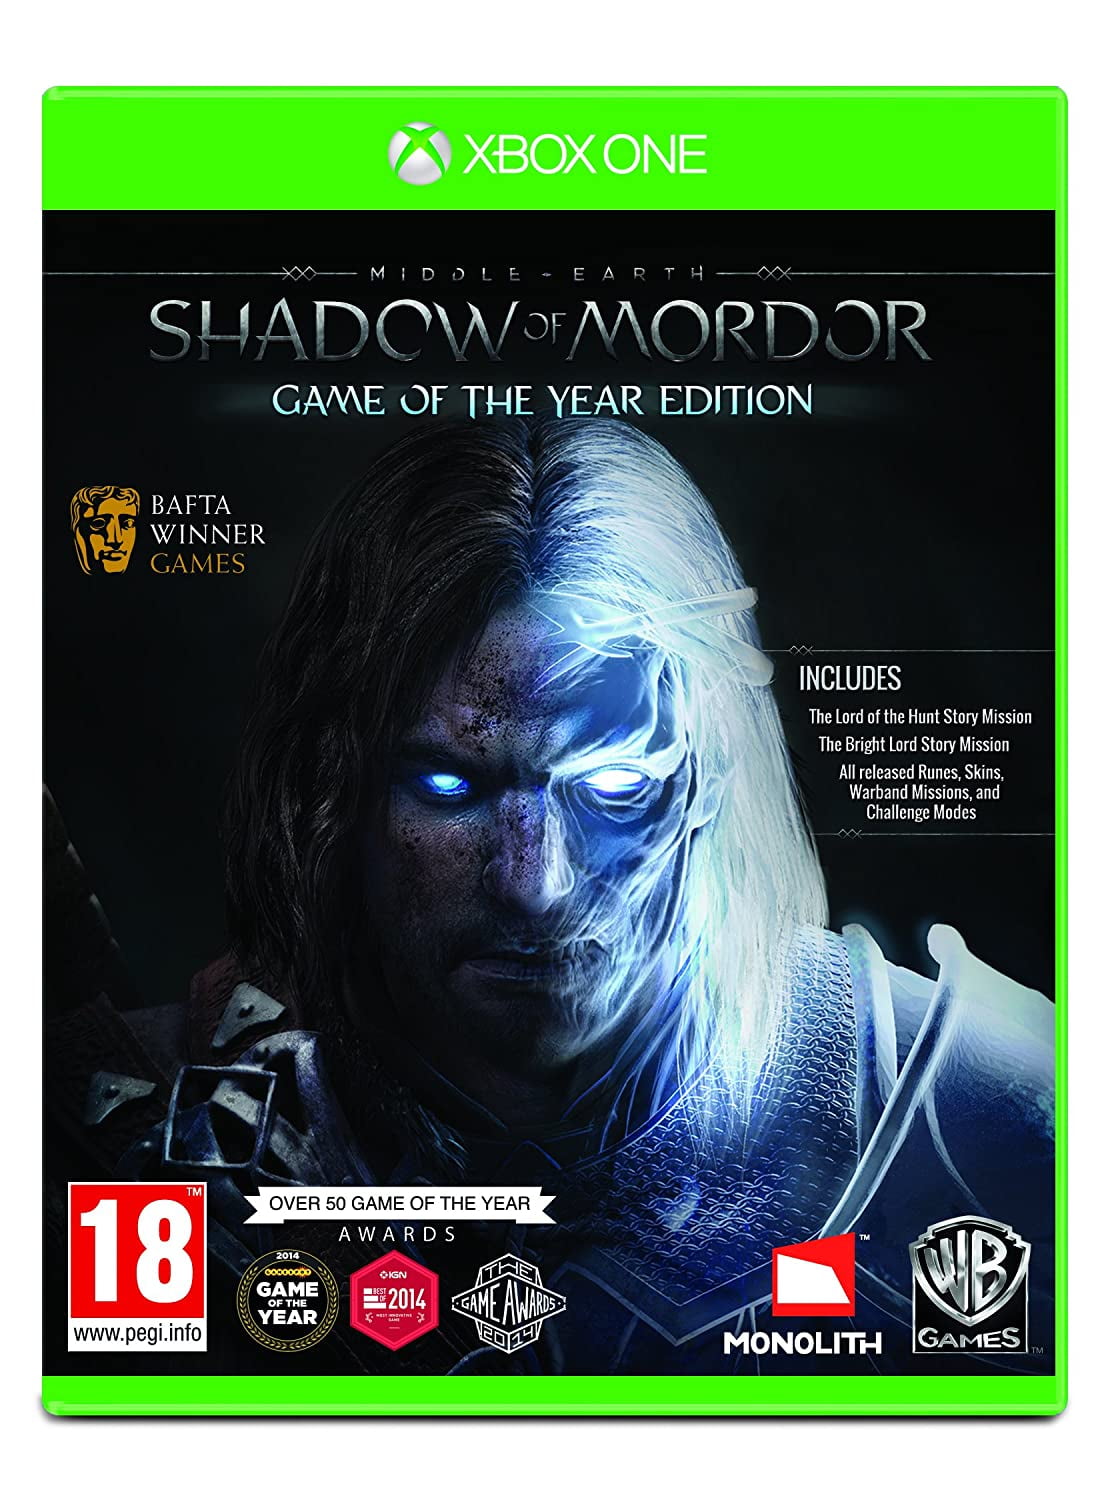 Middle-earth: Shadow of Mordor [Gameplay] - IGN